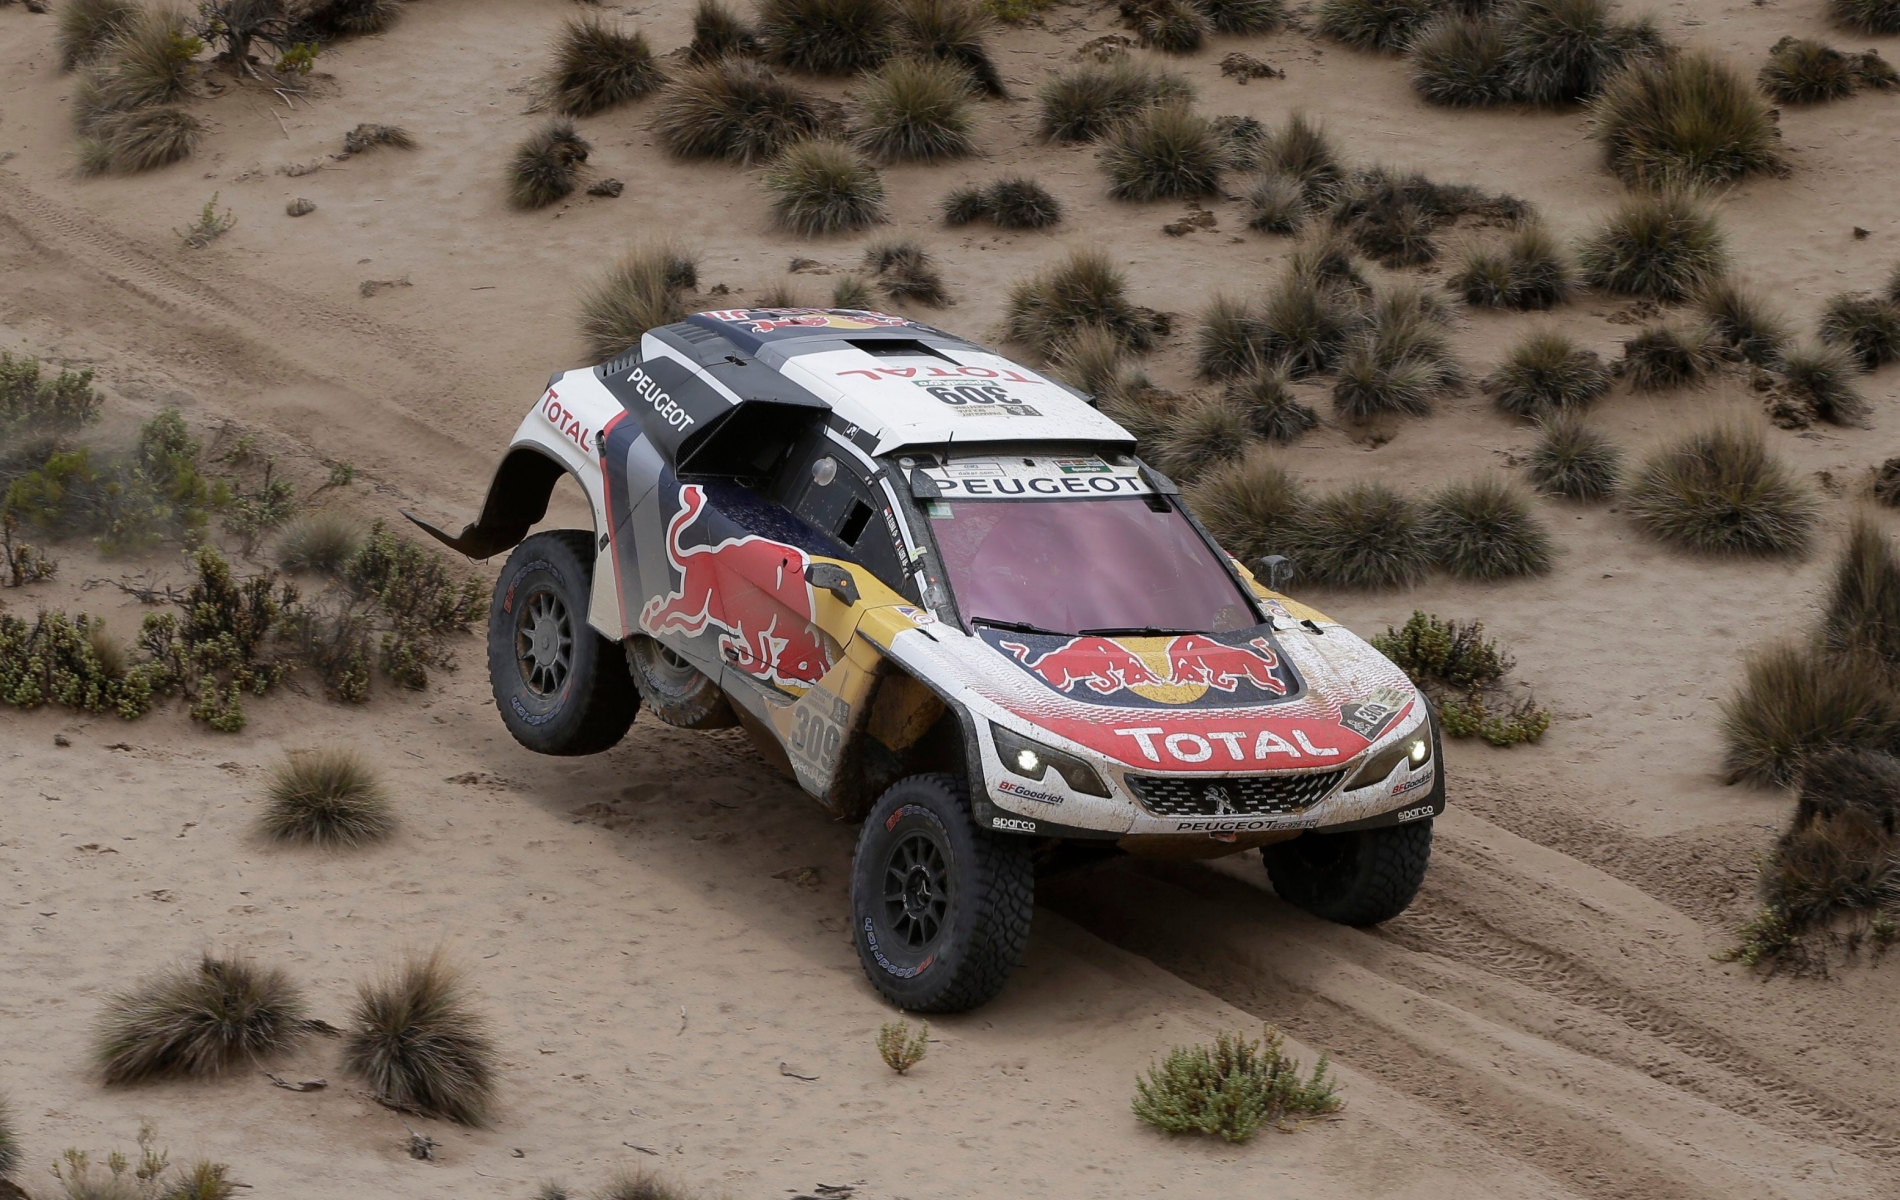 Driver Sebastien Loeb, of France, and co-driver Daniel Elena, of Monaco, race their Peugeot during the 7th stage of the Dakar Rally between Oruro and Uyuni, Bolivia, Monday, Jan. 9, 2017. The race started in Paraguay and passes through Argentina as well. (AP Photo/Martin Mejia) BOLIVIA DAKAR RALLY